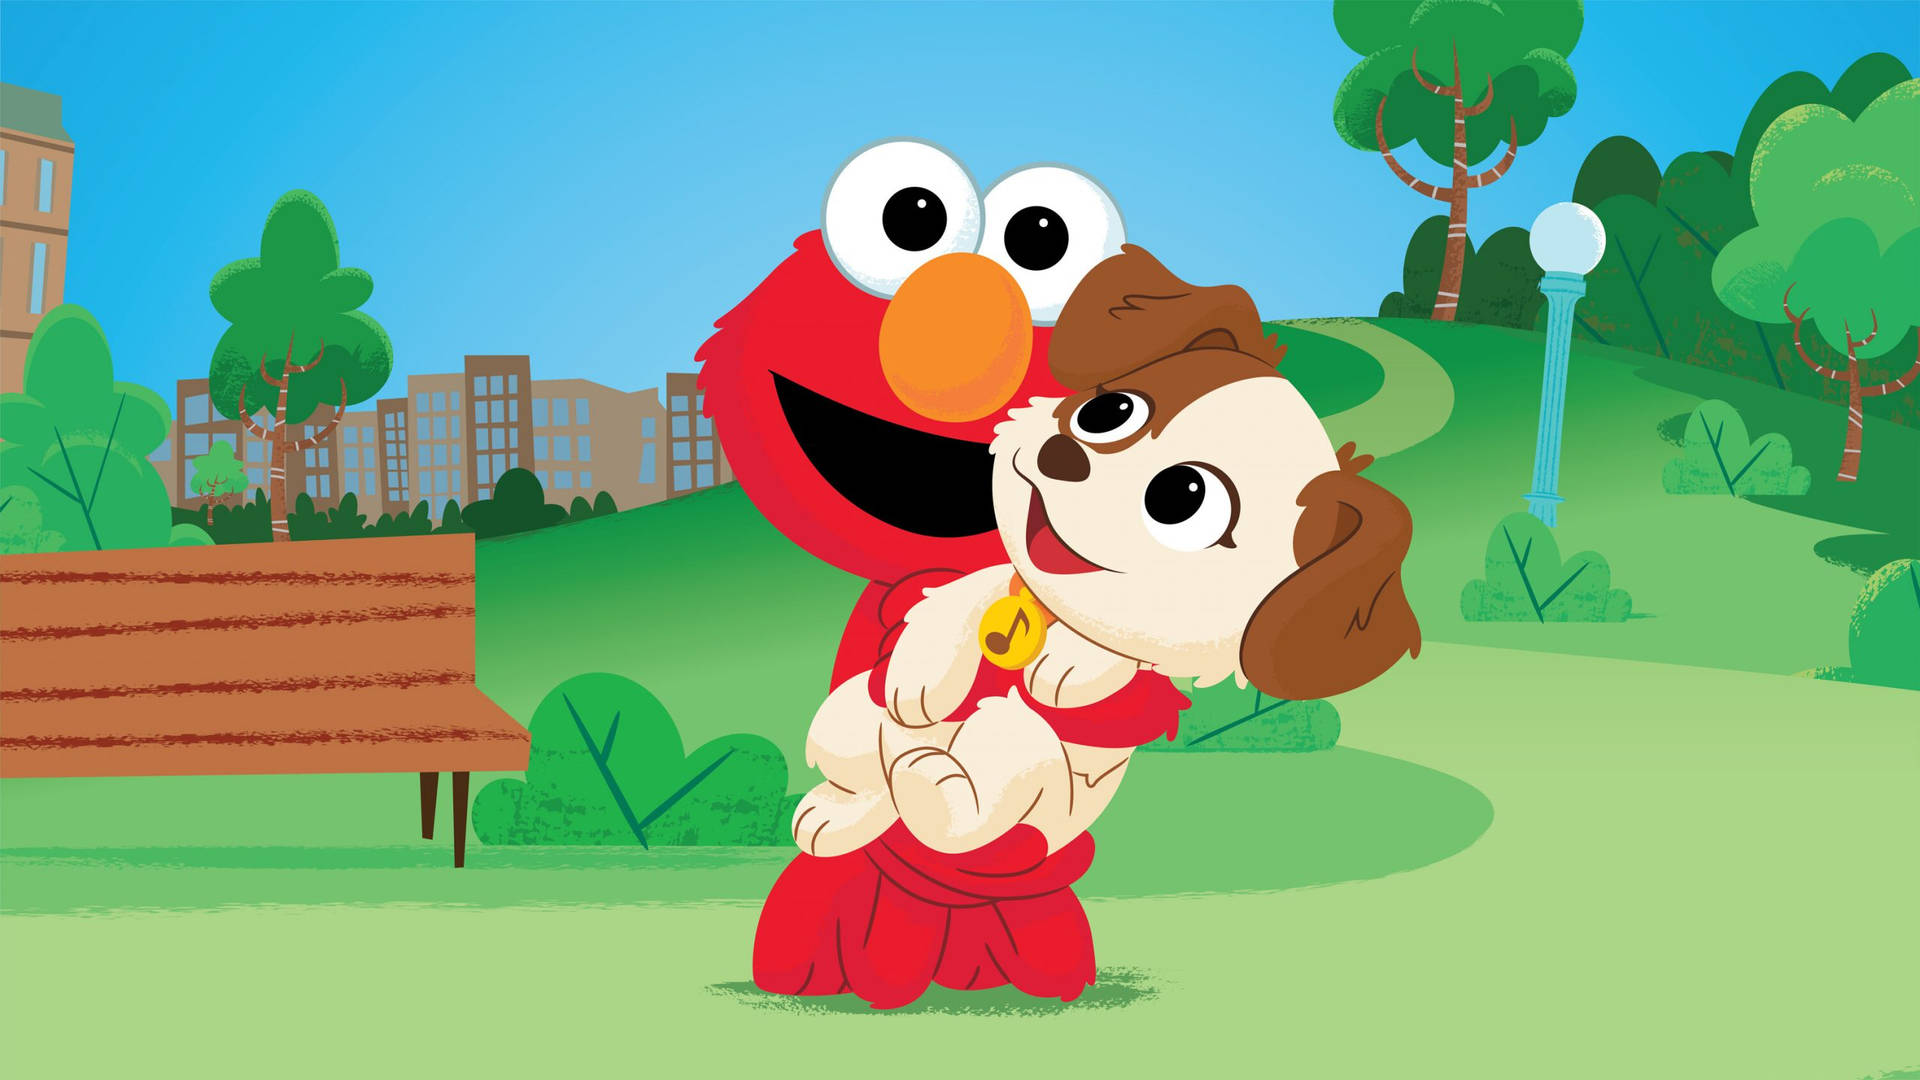 Elmo And His Pet In Park